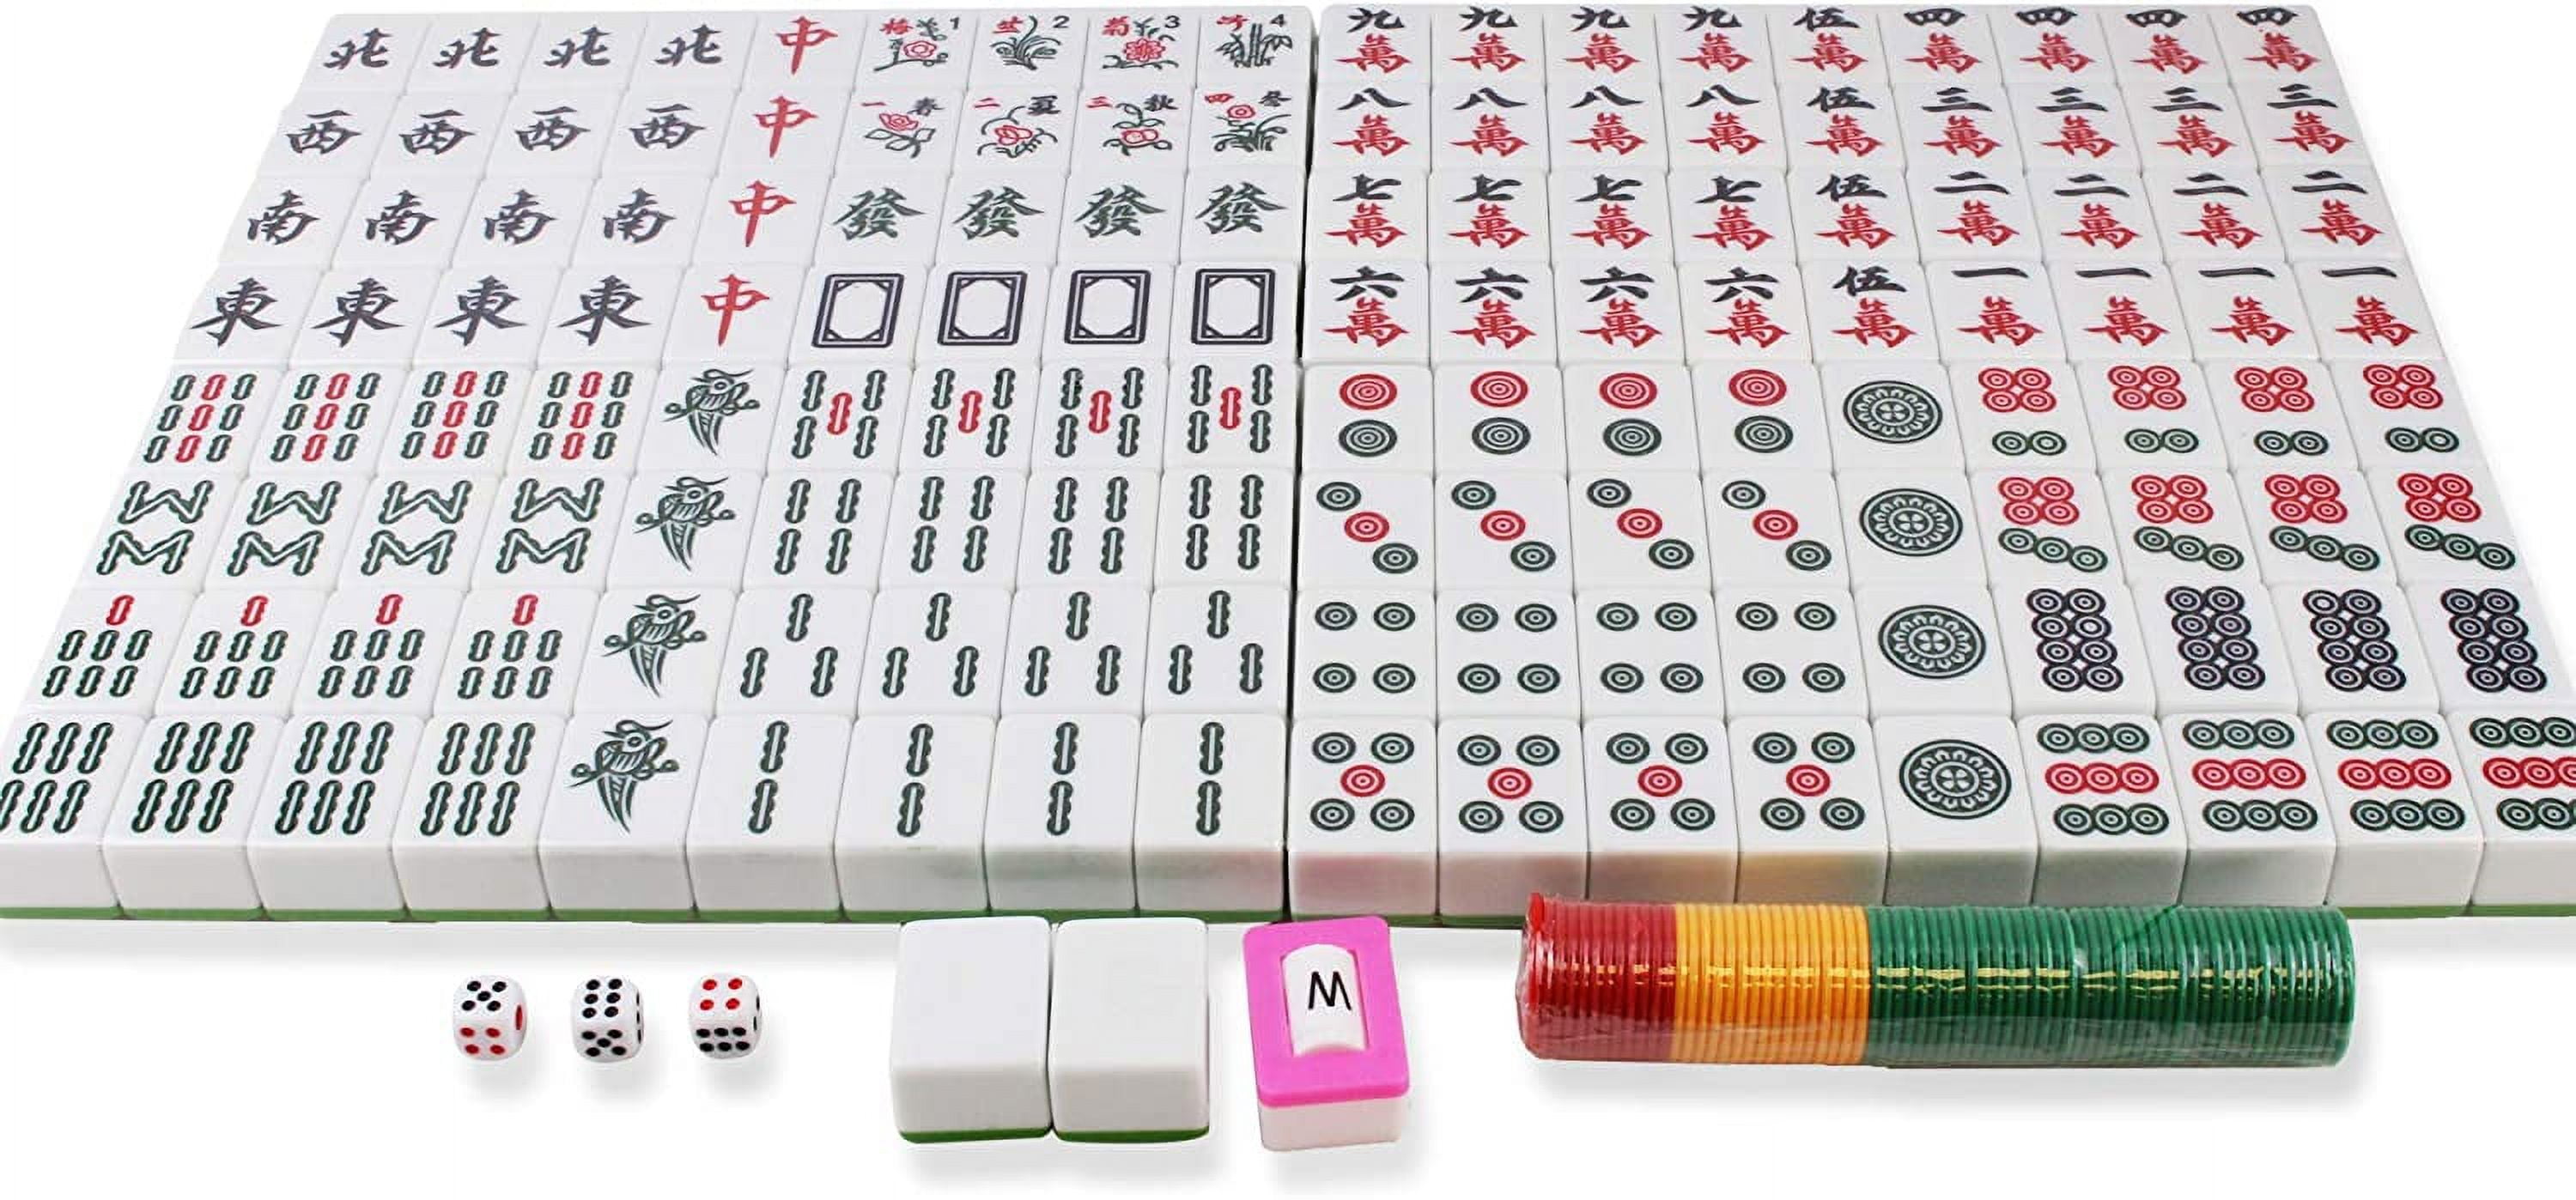  Chinese Mahjong Set X - Large 44 MM Mahjong Game Set Including  Full Size Tiles and Tablecloth, Cartoon Mahjong with 144 Tiles, Dice &  Storage Bag, for Gift Birthday Leisure Toy,2,44MM 